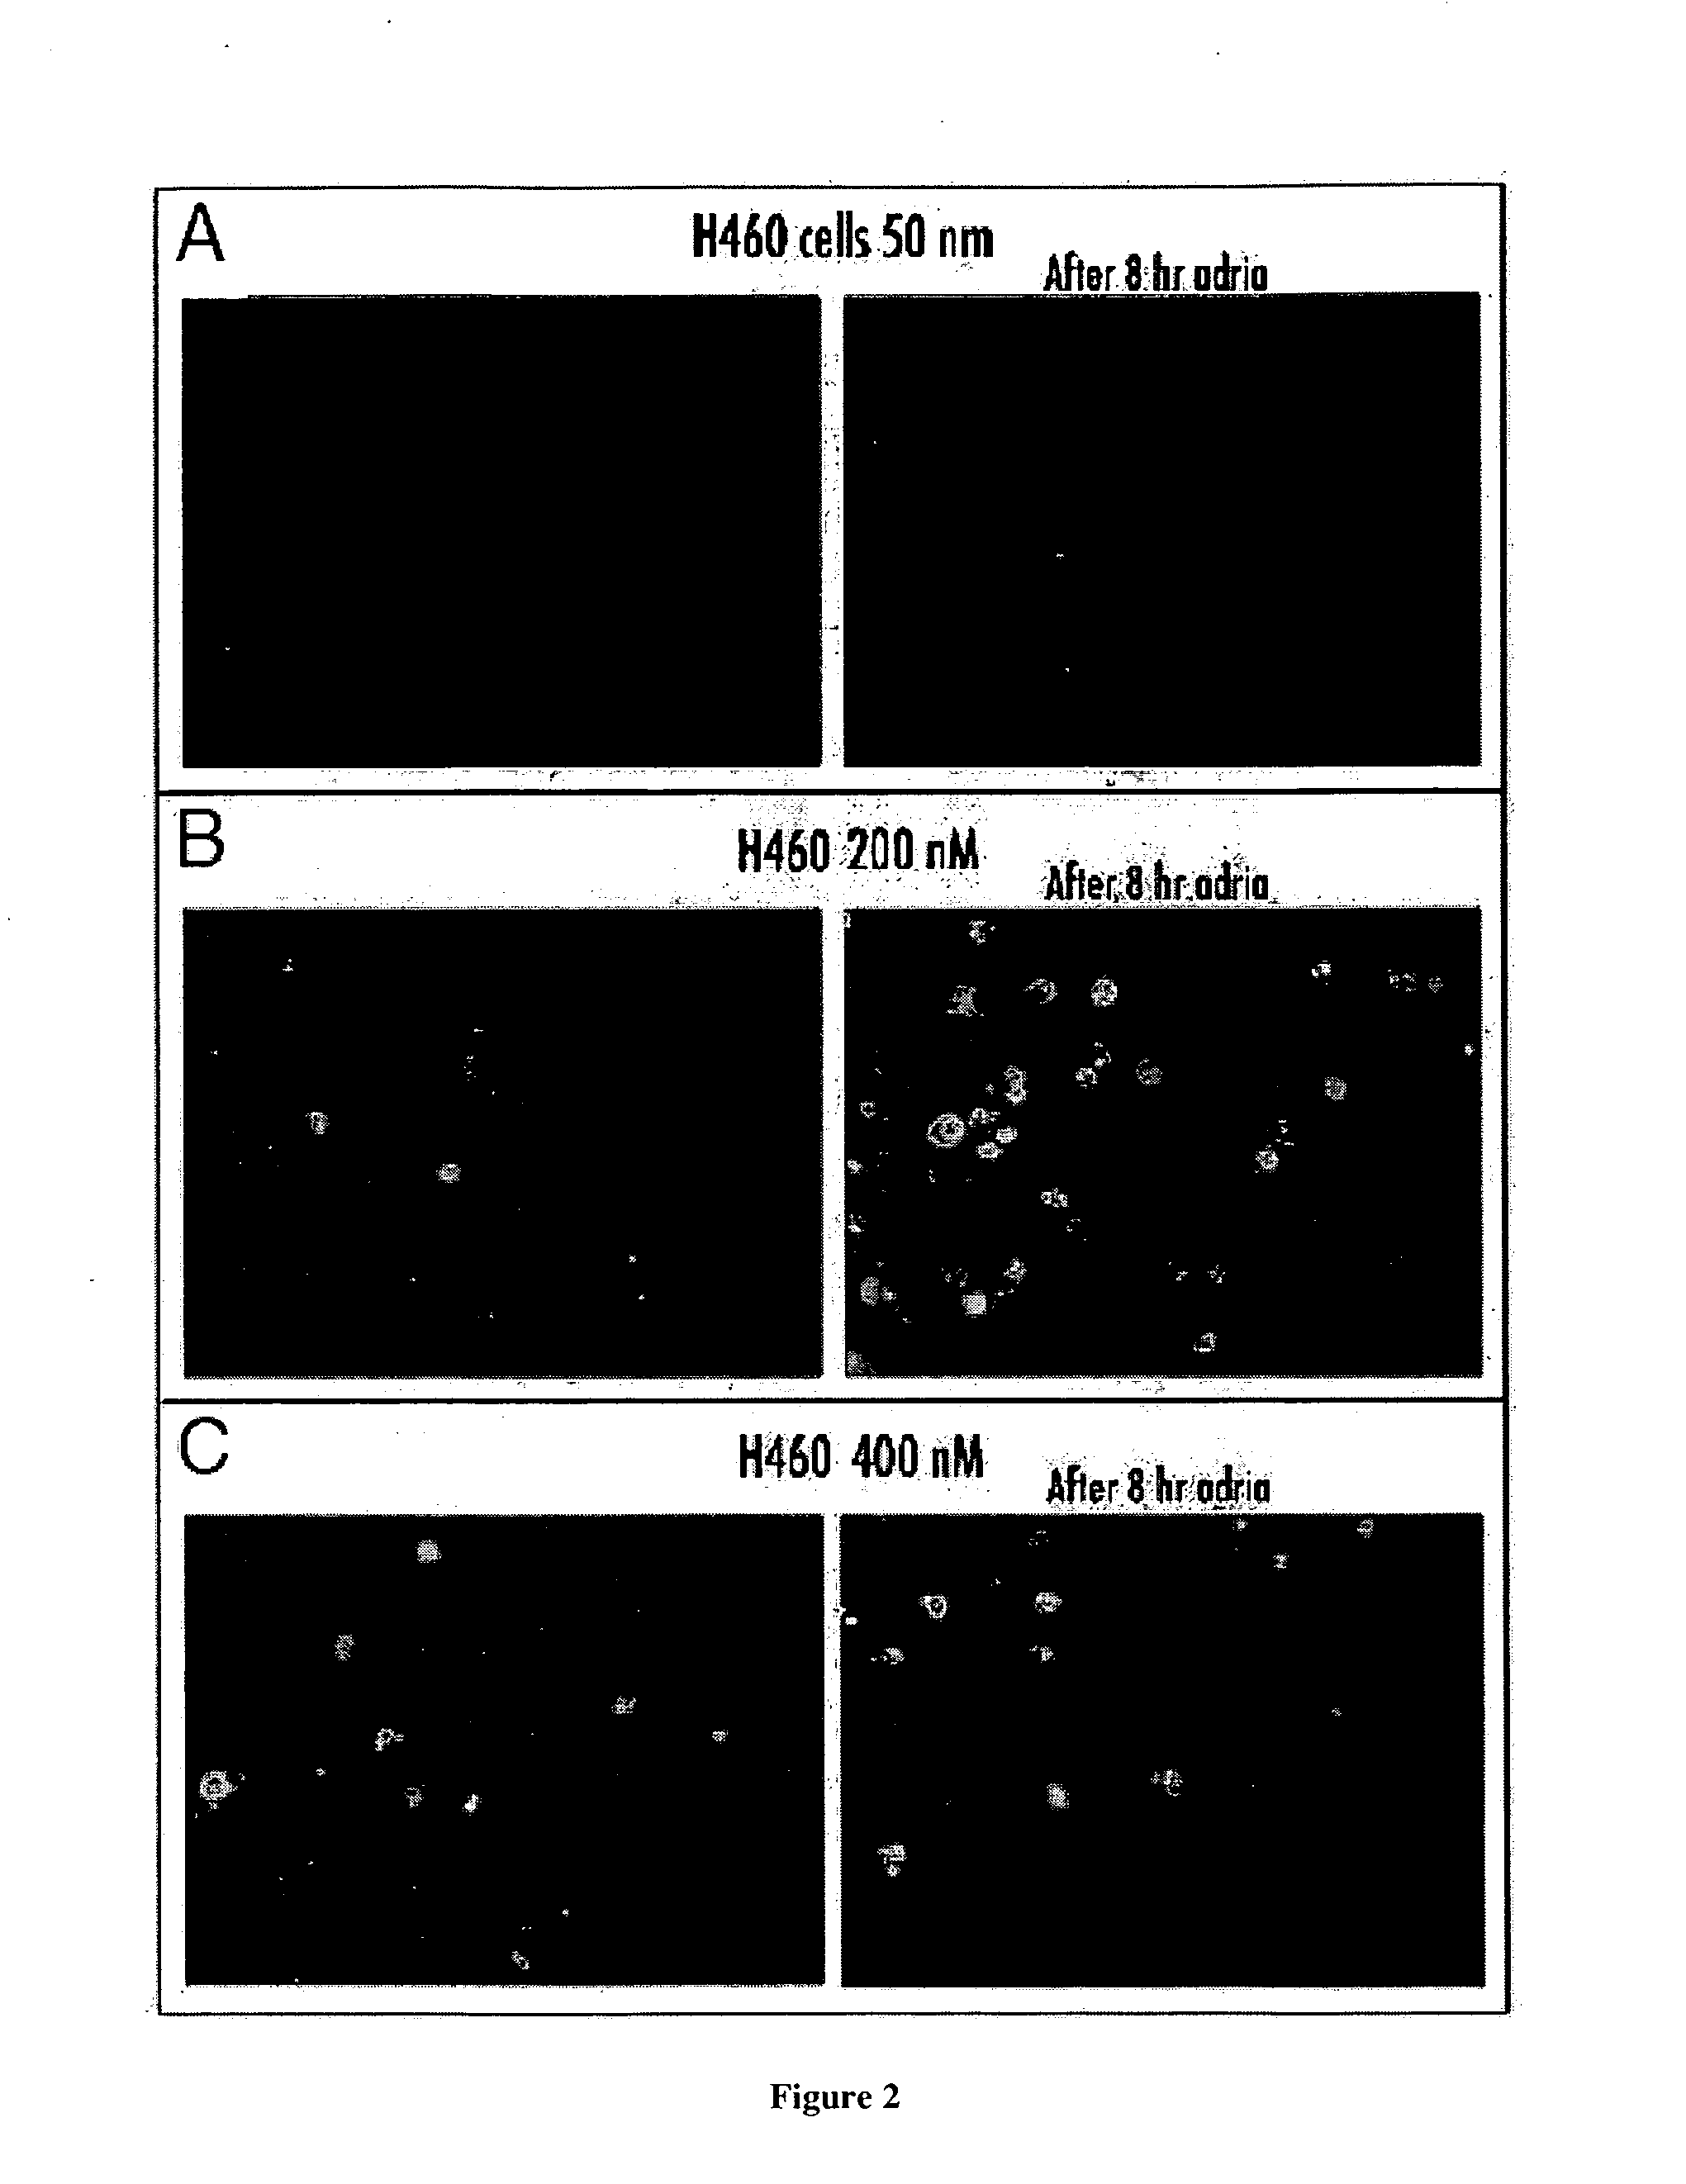 Molecular beacons, methods and kits for detecting DNA damage response